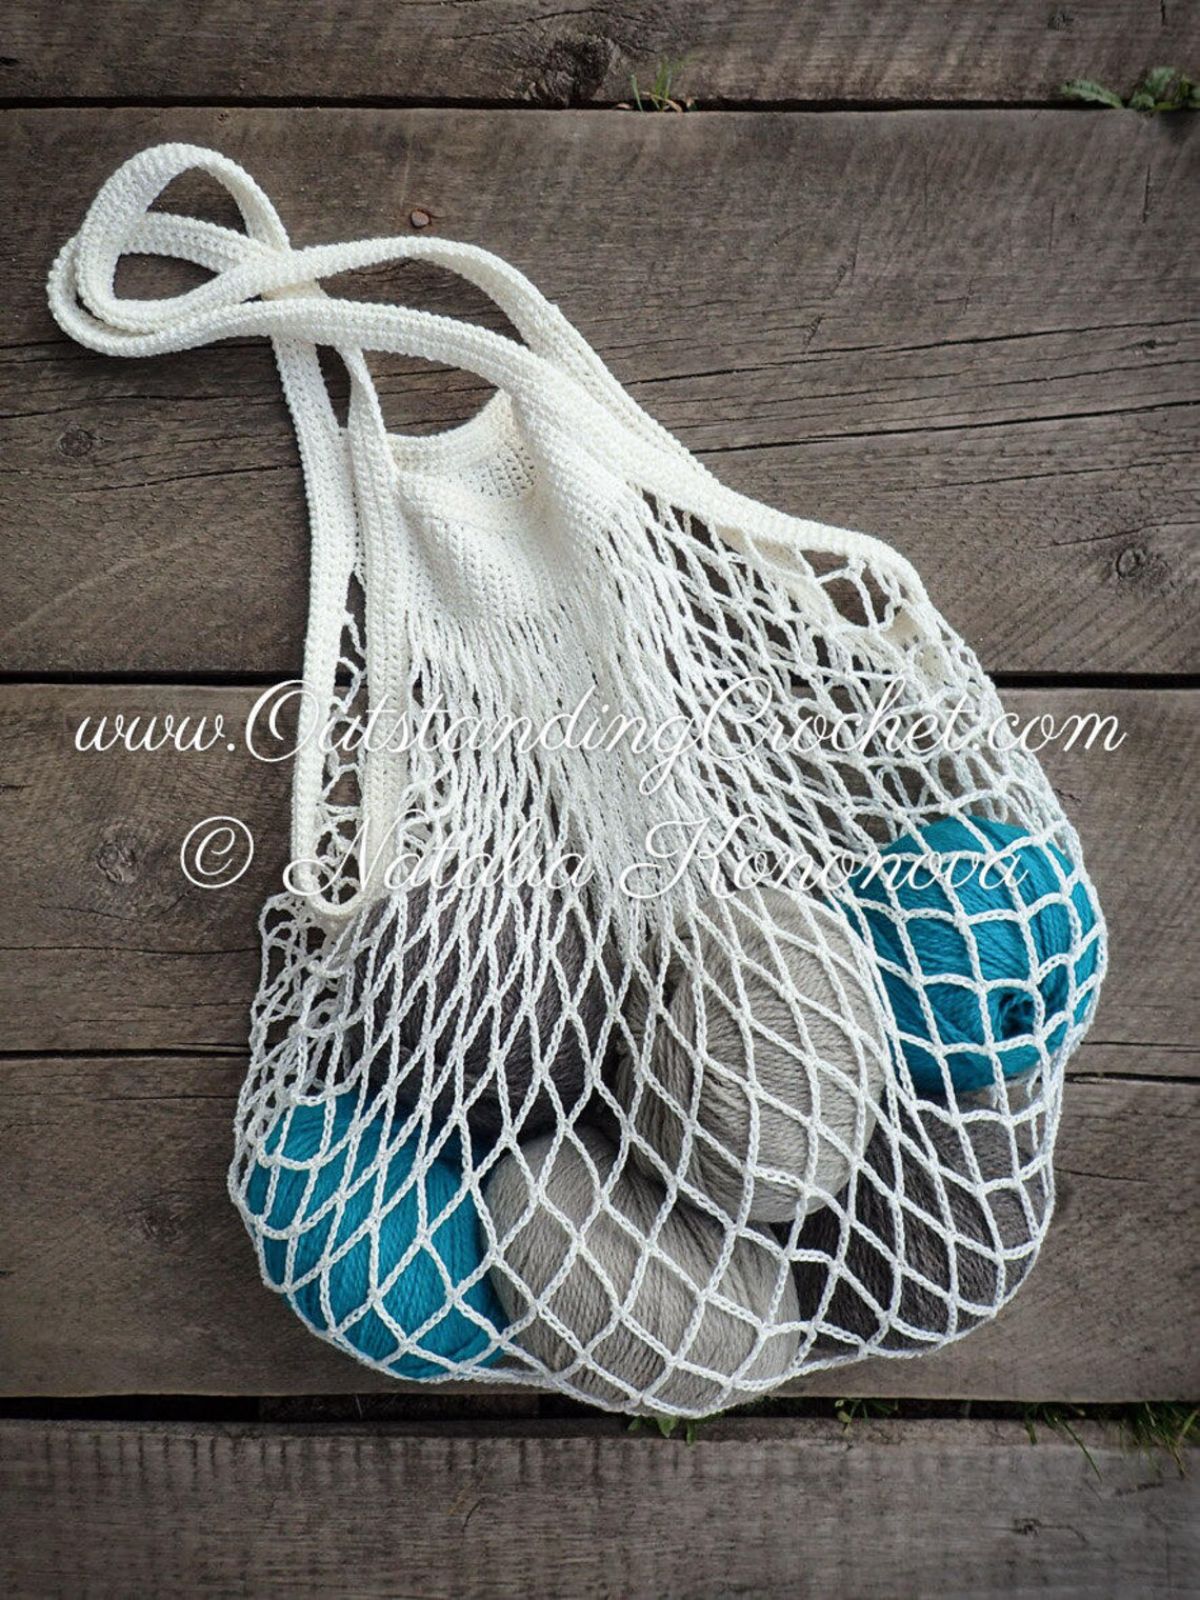 White crochet mesh bag with two thick handles filled with blue and gray yarn balls on a wooden table. 